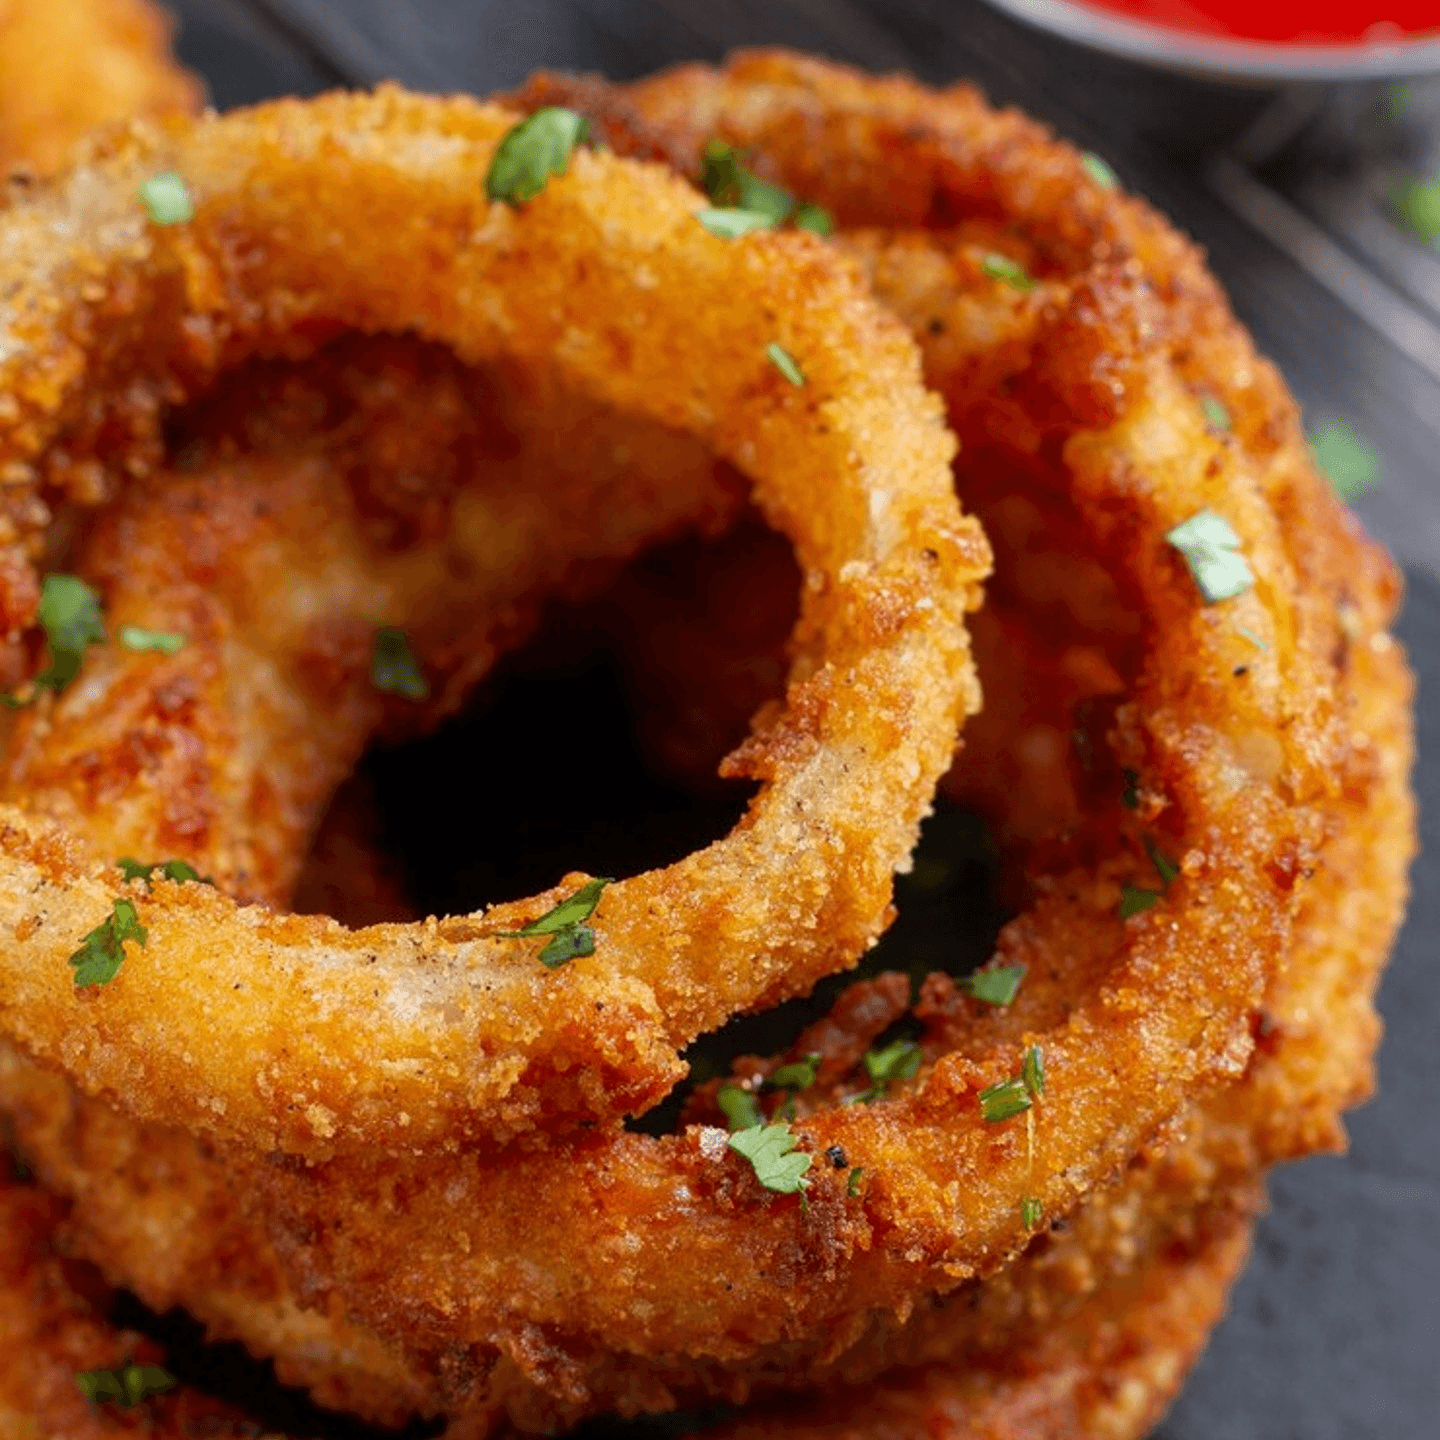 Our mouthwatering Onion Rings!